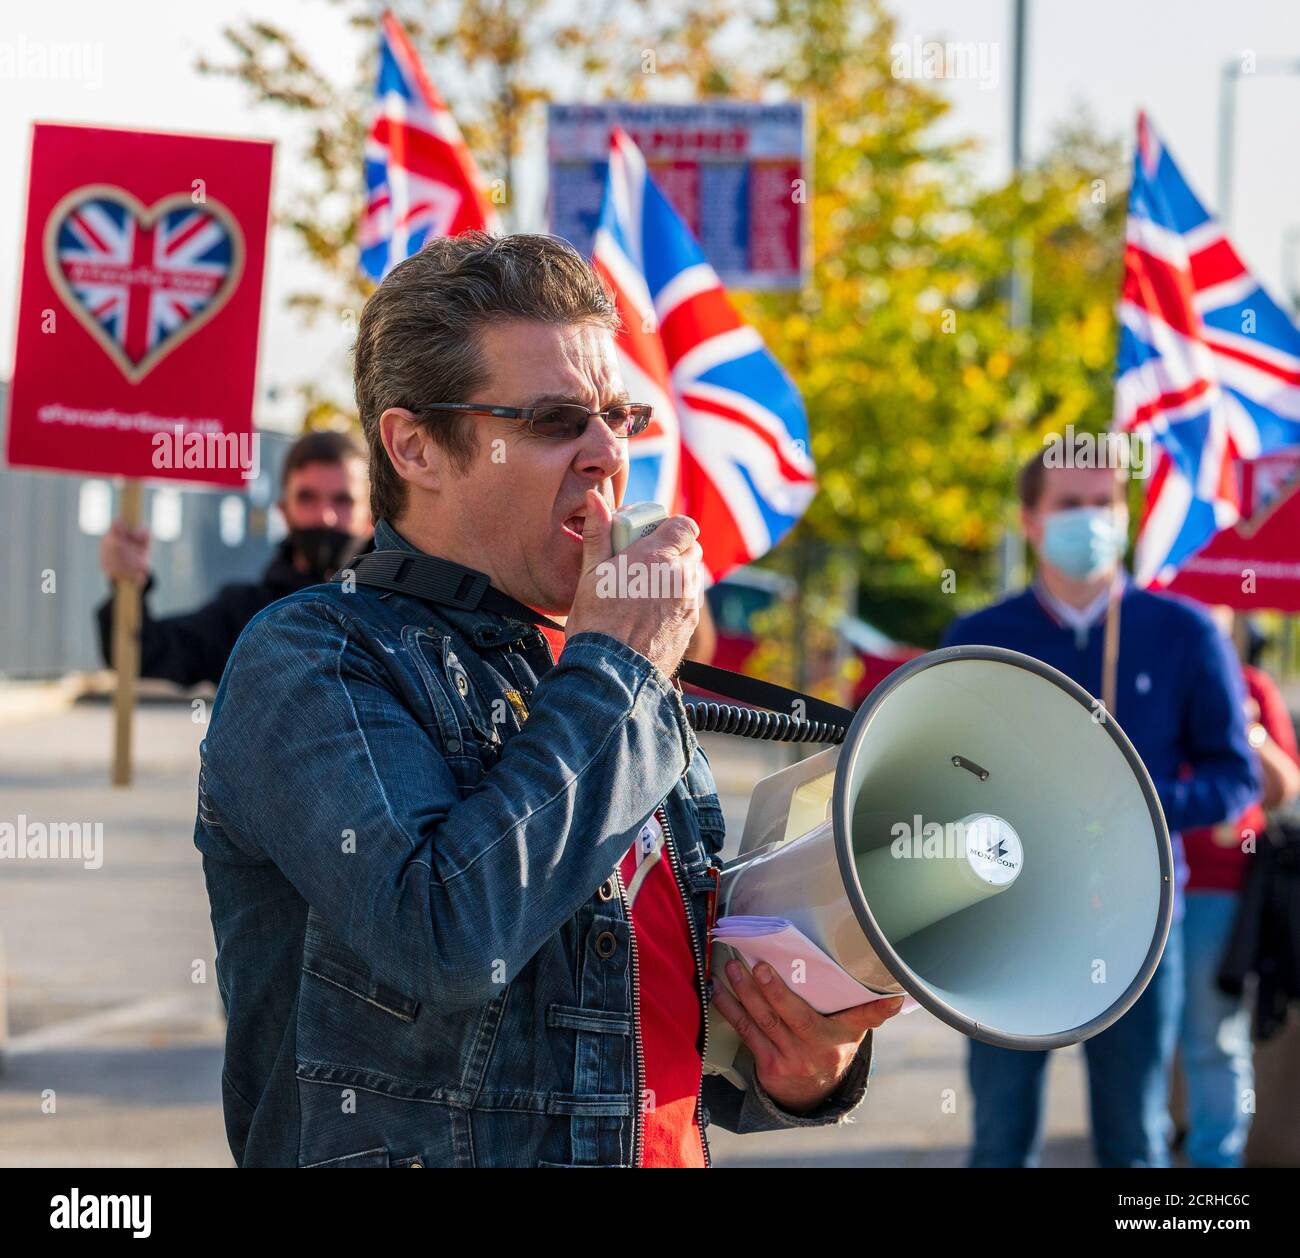 Alistair McConnachie, the leader of the Pro Unionist political pressure group called "a Force for Good" at a political rally, Glasgow, Scotland, UK Stock Photo